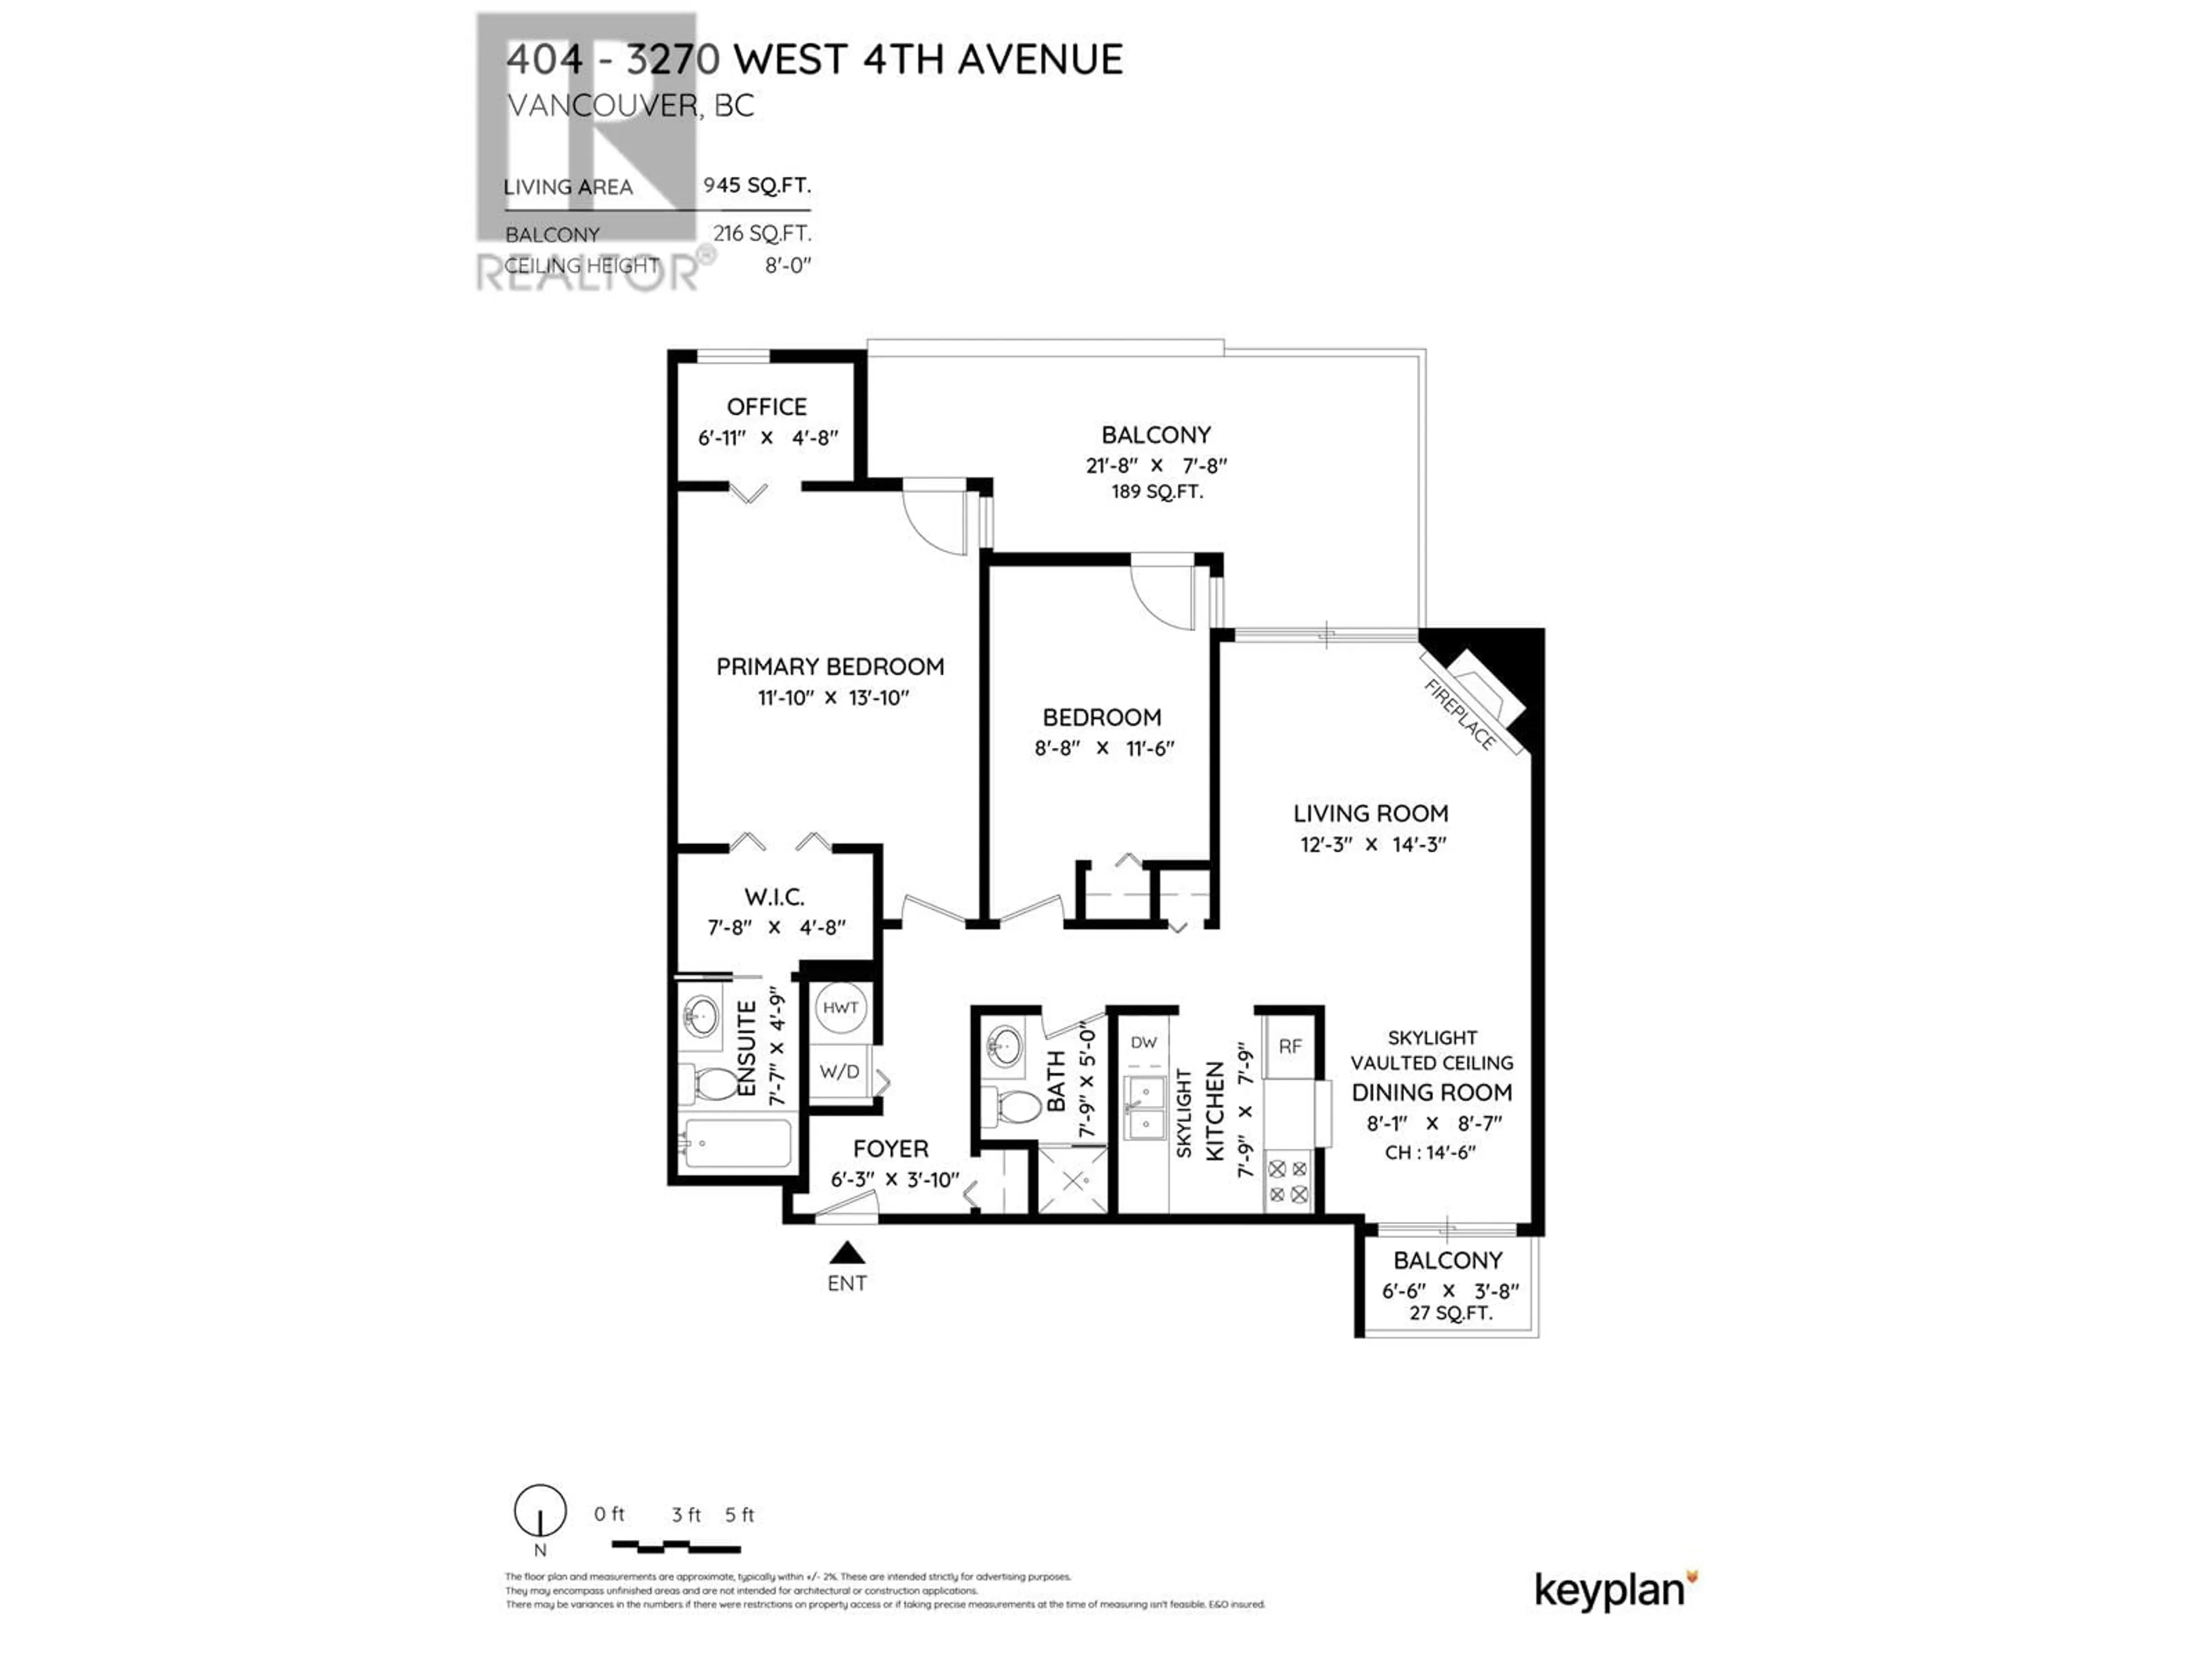 Floor plan for 404 3270 W 4TH AVENUE, Vancouver British Columbia V6K1R9